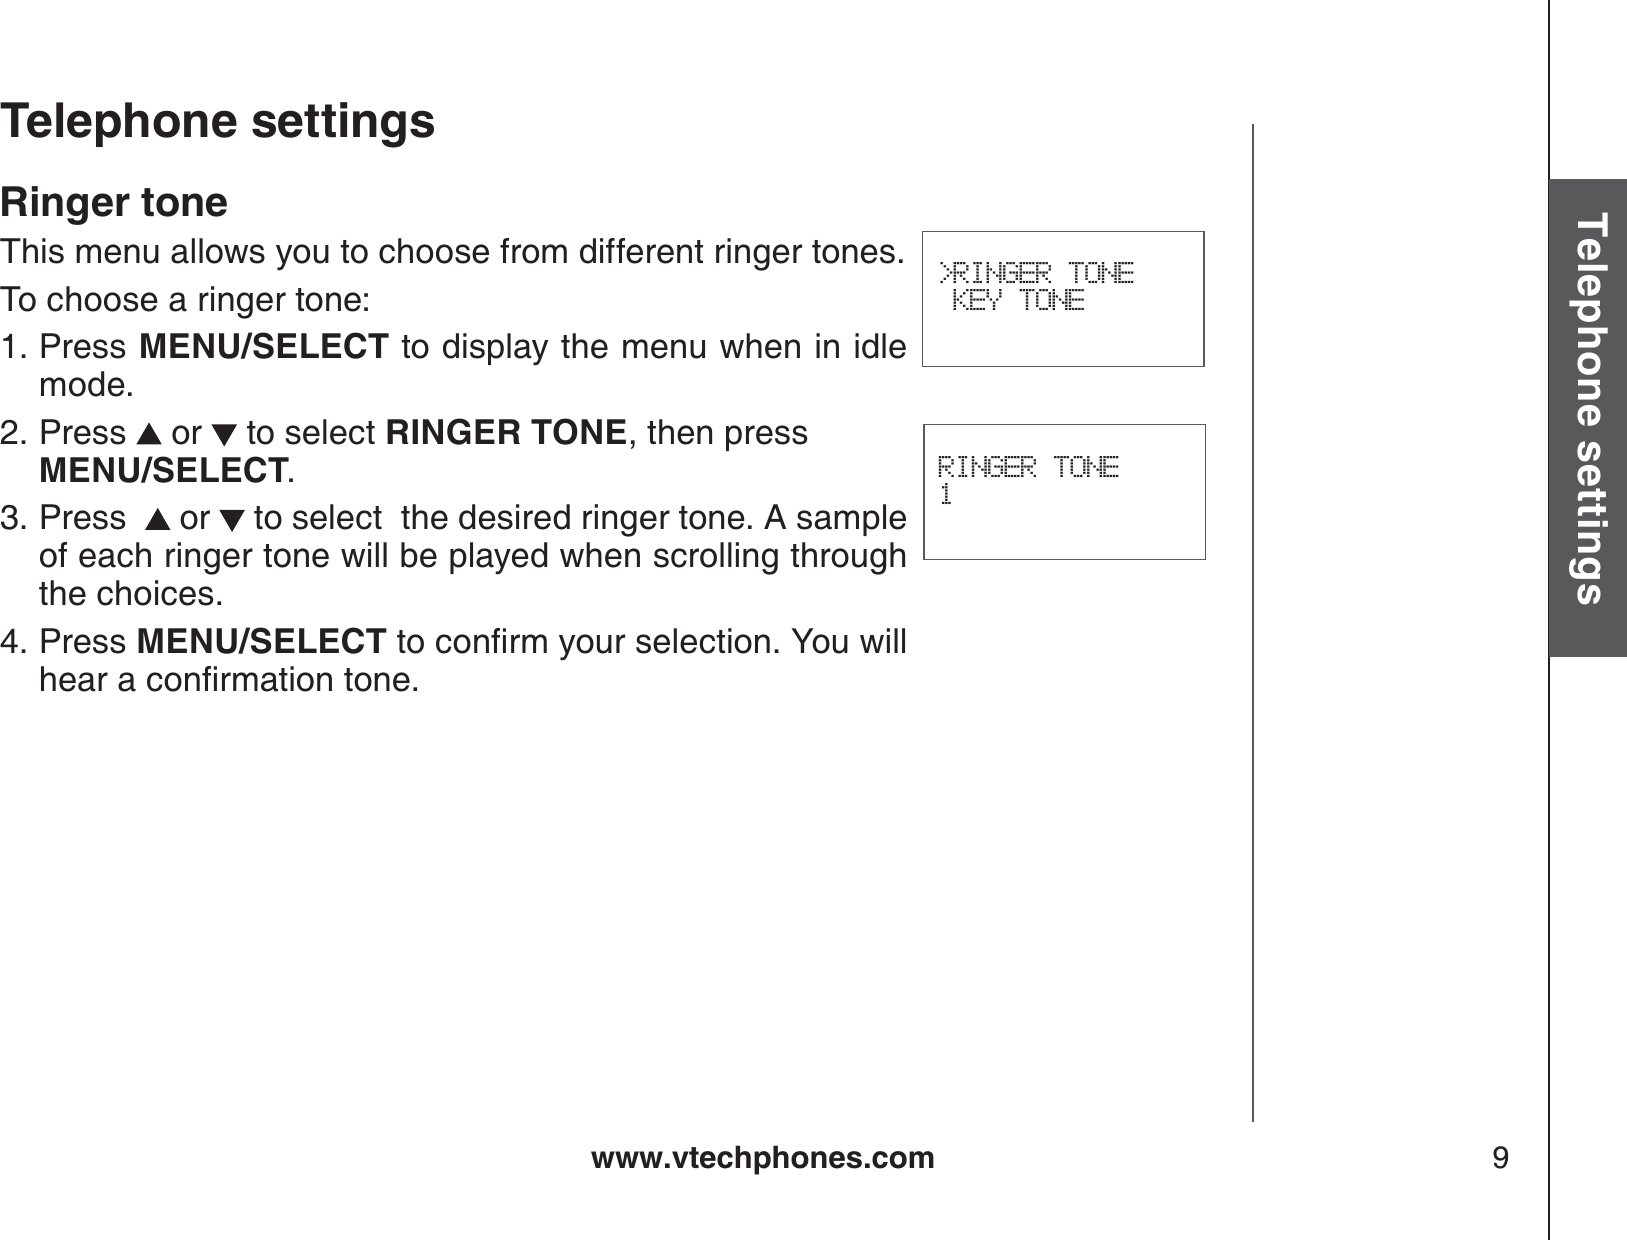 www.vtechphones.com 9Basic operationTelephone settingsTelephone settingsRINGER TONE1&gt;RINGER TONE KEY TONERinger toneThis menu allows you to choose from different ringer tones.To choose a ringer tone:Press MENU/SELECT to display the menu when in idle mode.Press  or   to select RINGER TONE, then press MENU/SELECT.Press   or   to select  the desired ringer tone. A sample of each ringer tone will be played when scrolling through the choices.Press MENU/SELECTVQEQPſTO[QWTUGNGEVKQP;QWYKNNJGCTCEQPſTOCVKQPVQPG1.2.3.4.